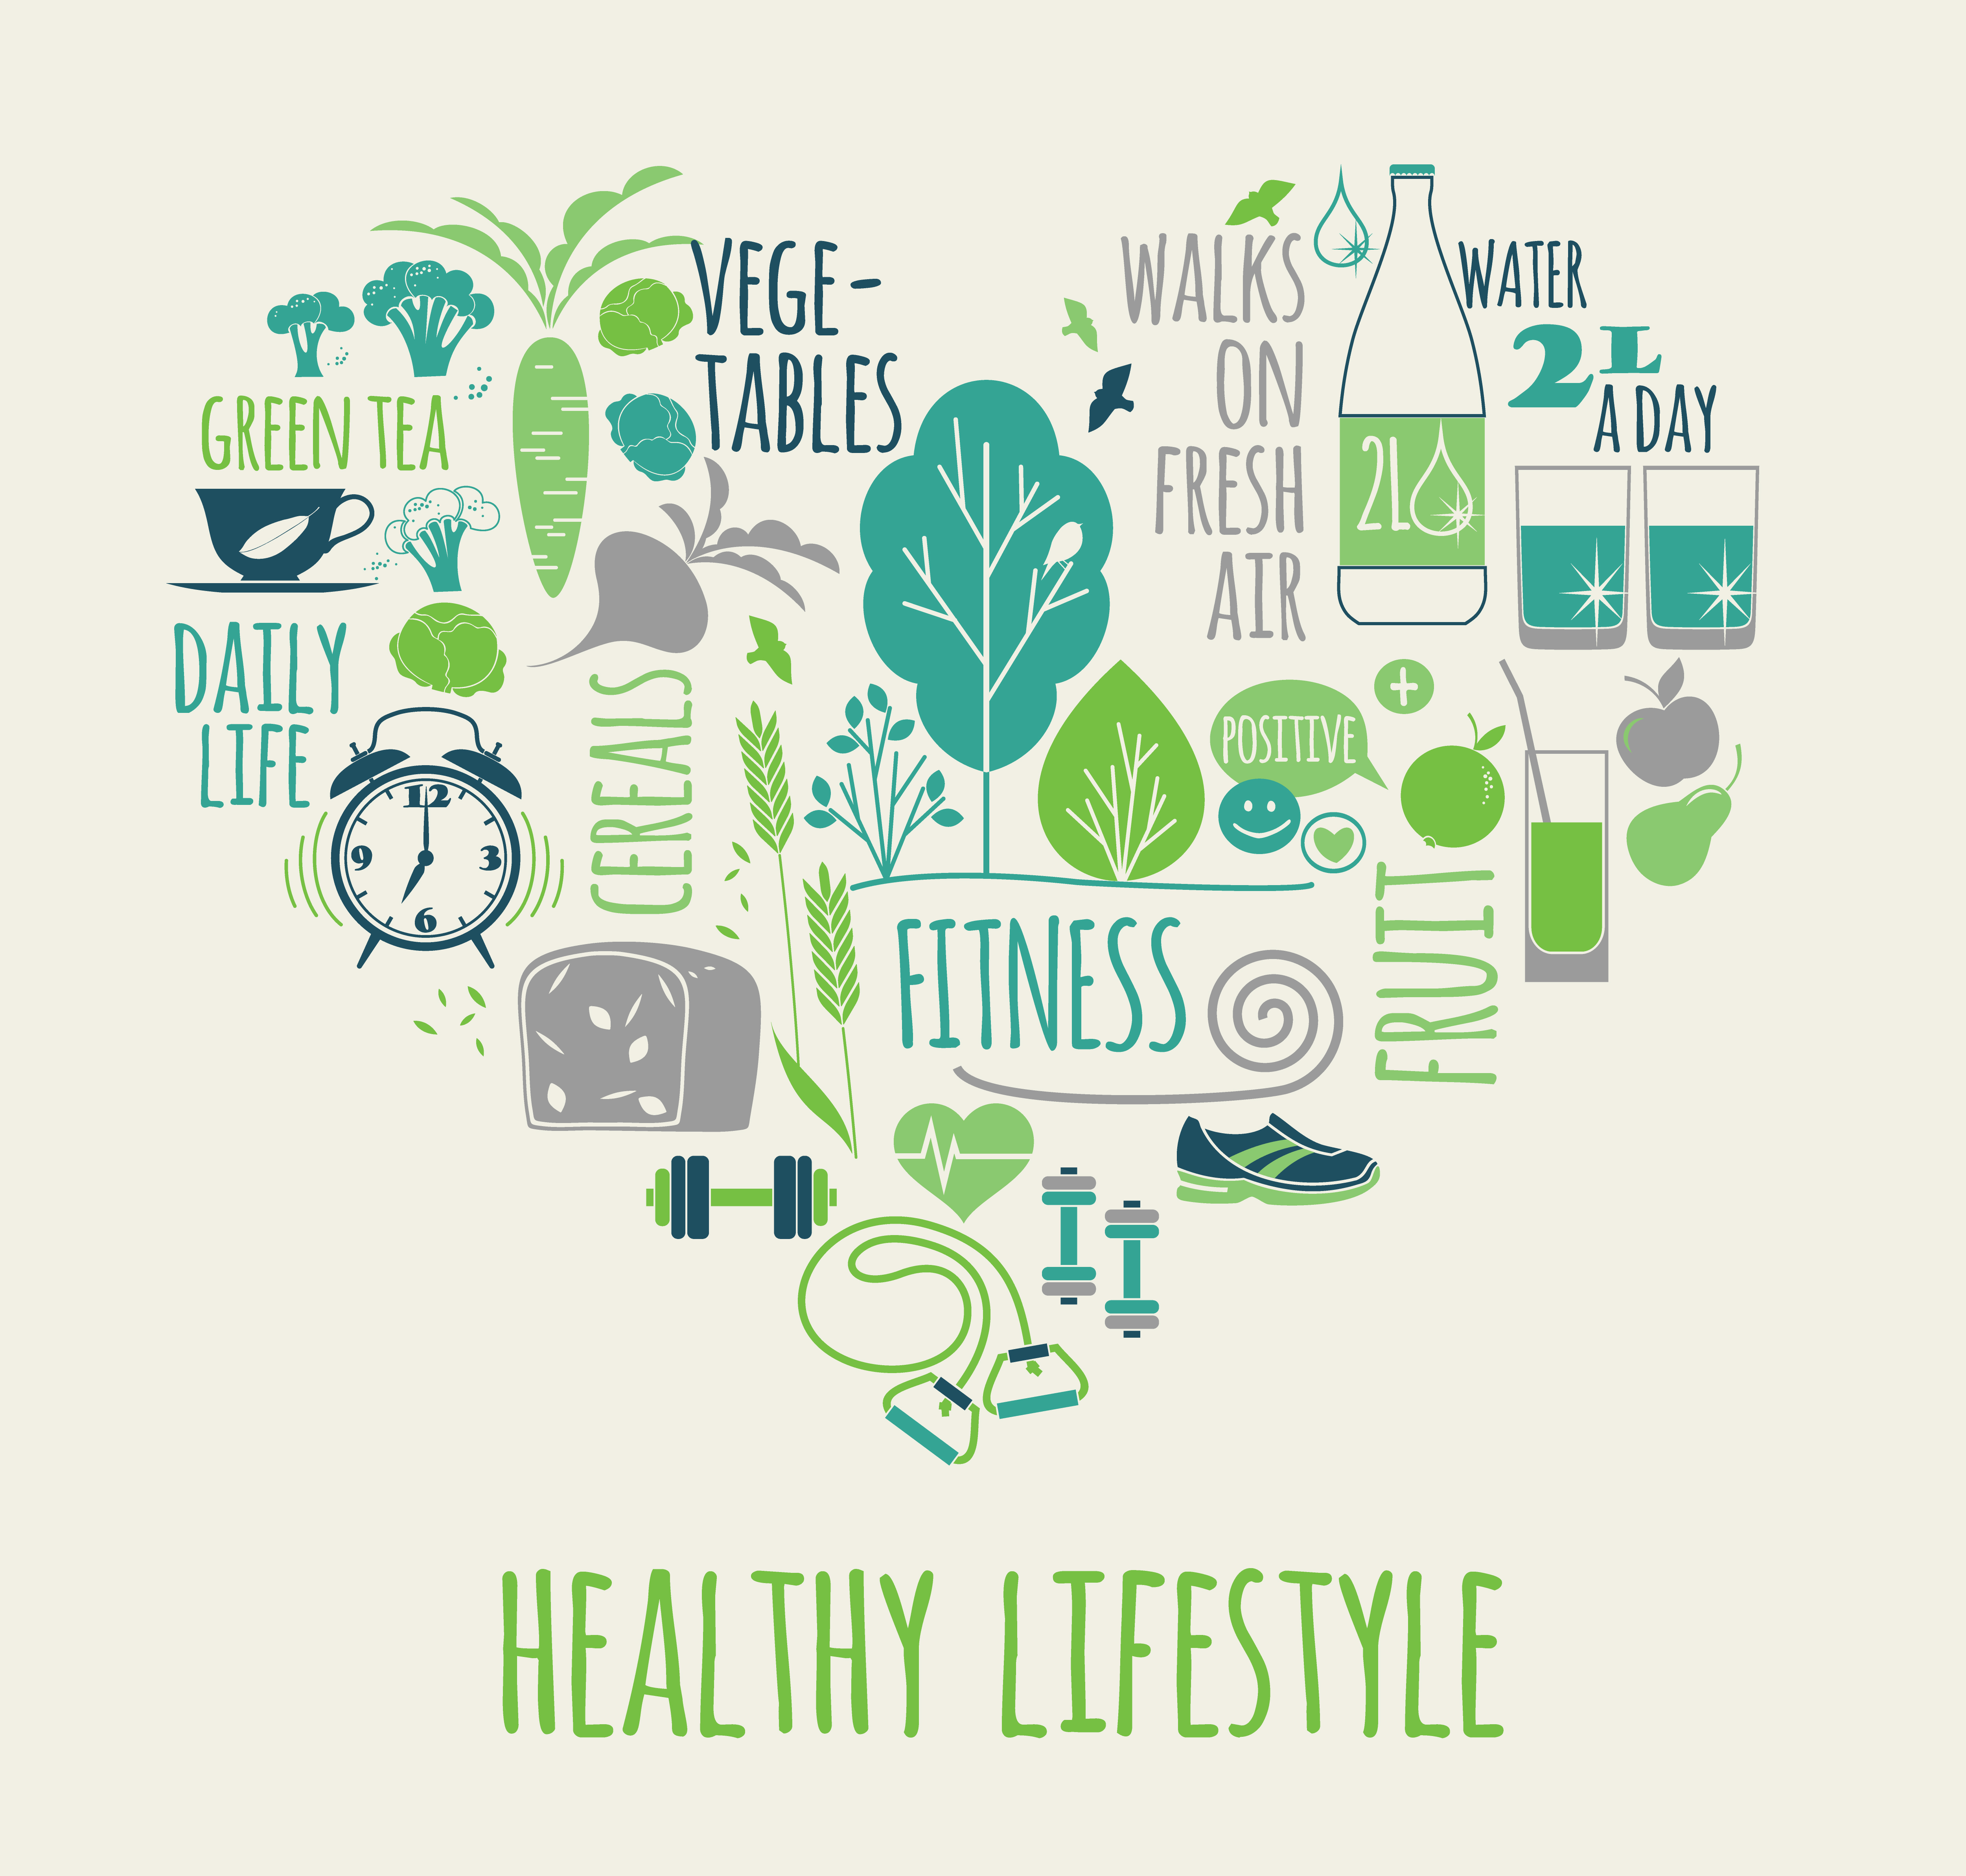 Healthy lifestyle vector illustration in the shape of ...